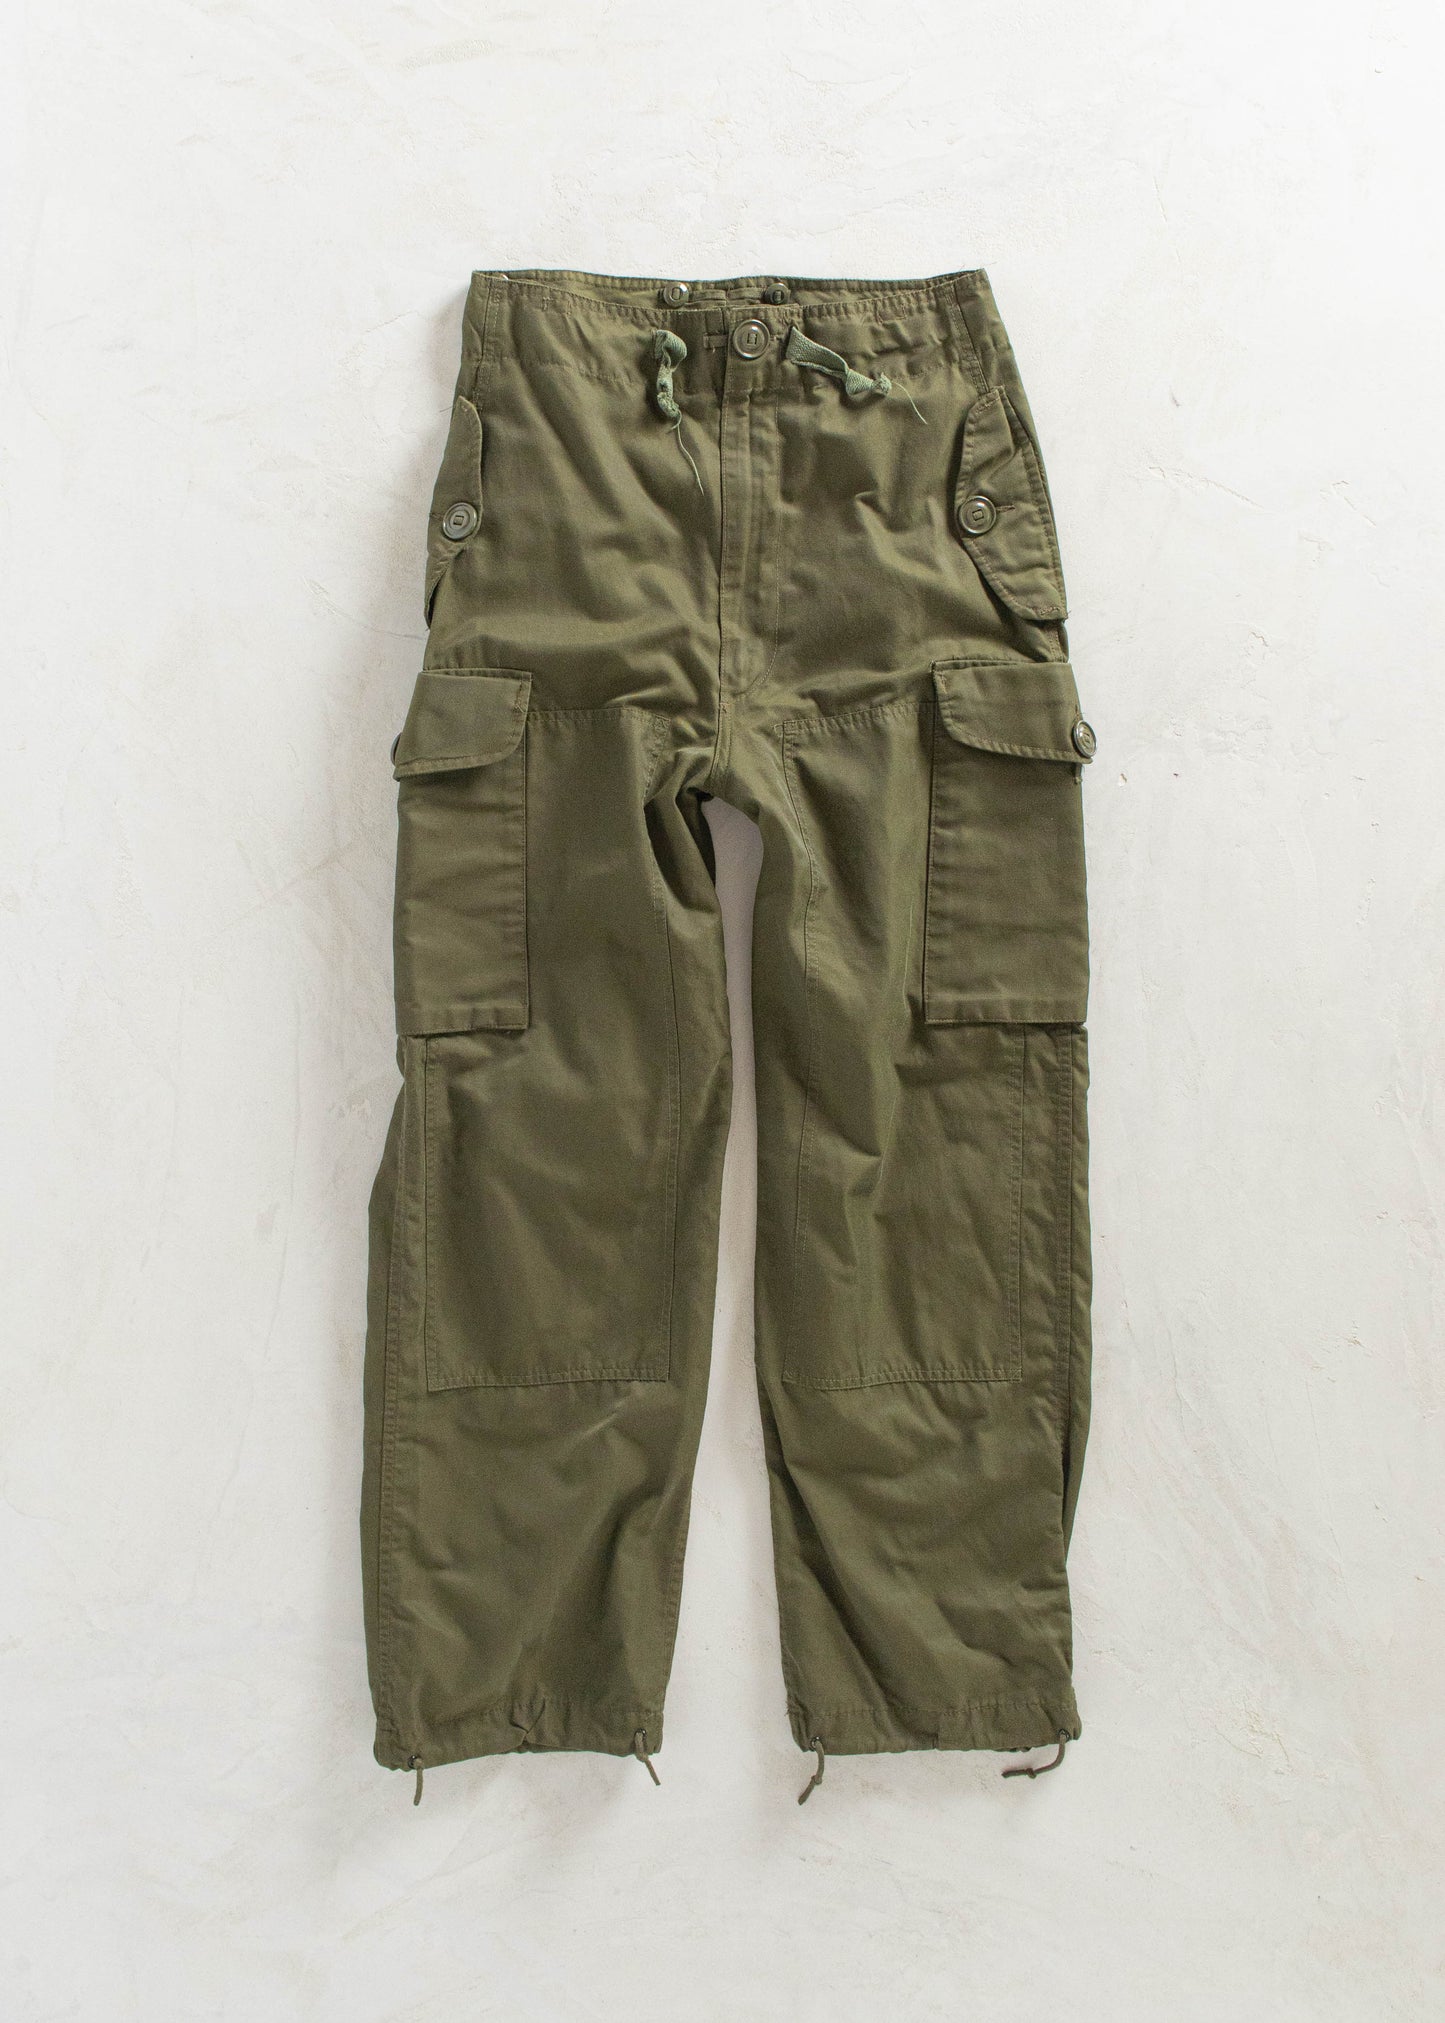 Vintage 1980s Military Wind Cargo Pants Size XS/S